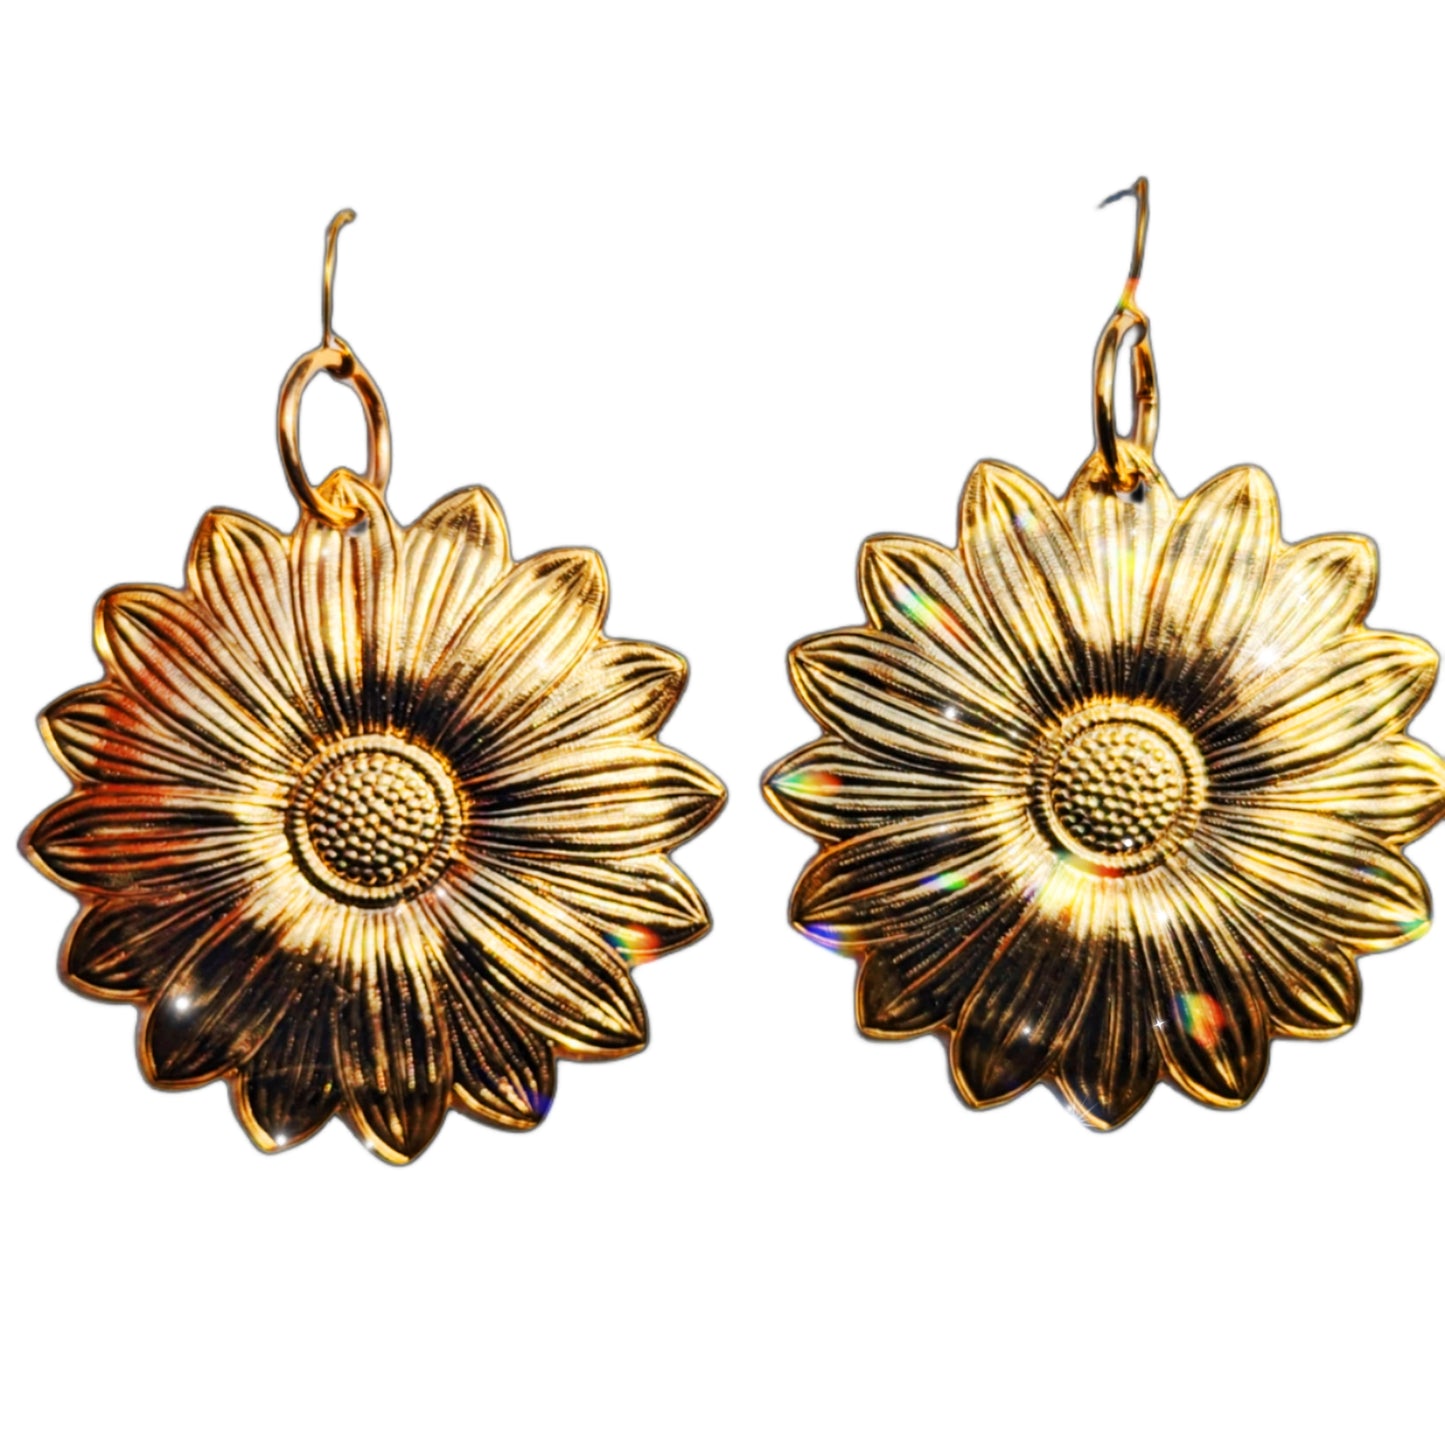 24K Gold-Plated Jumbo Flower Earrings 3 inches USA Made by Sugar Gay Isber unisex-adult